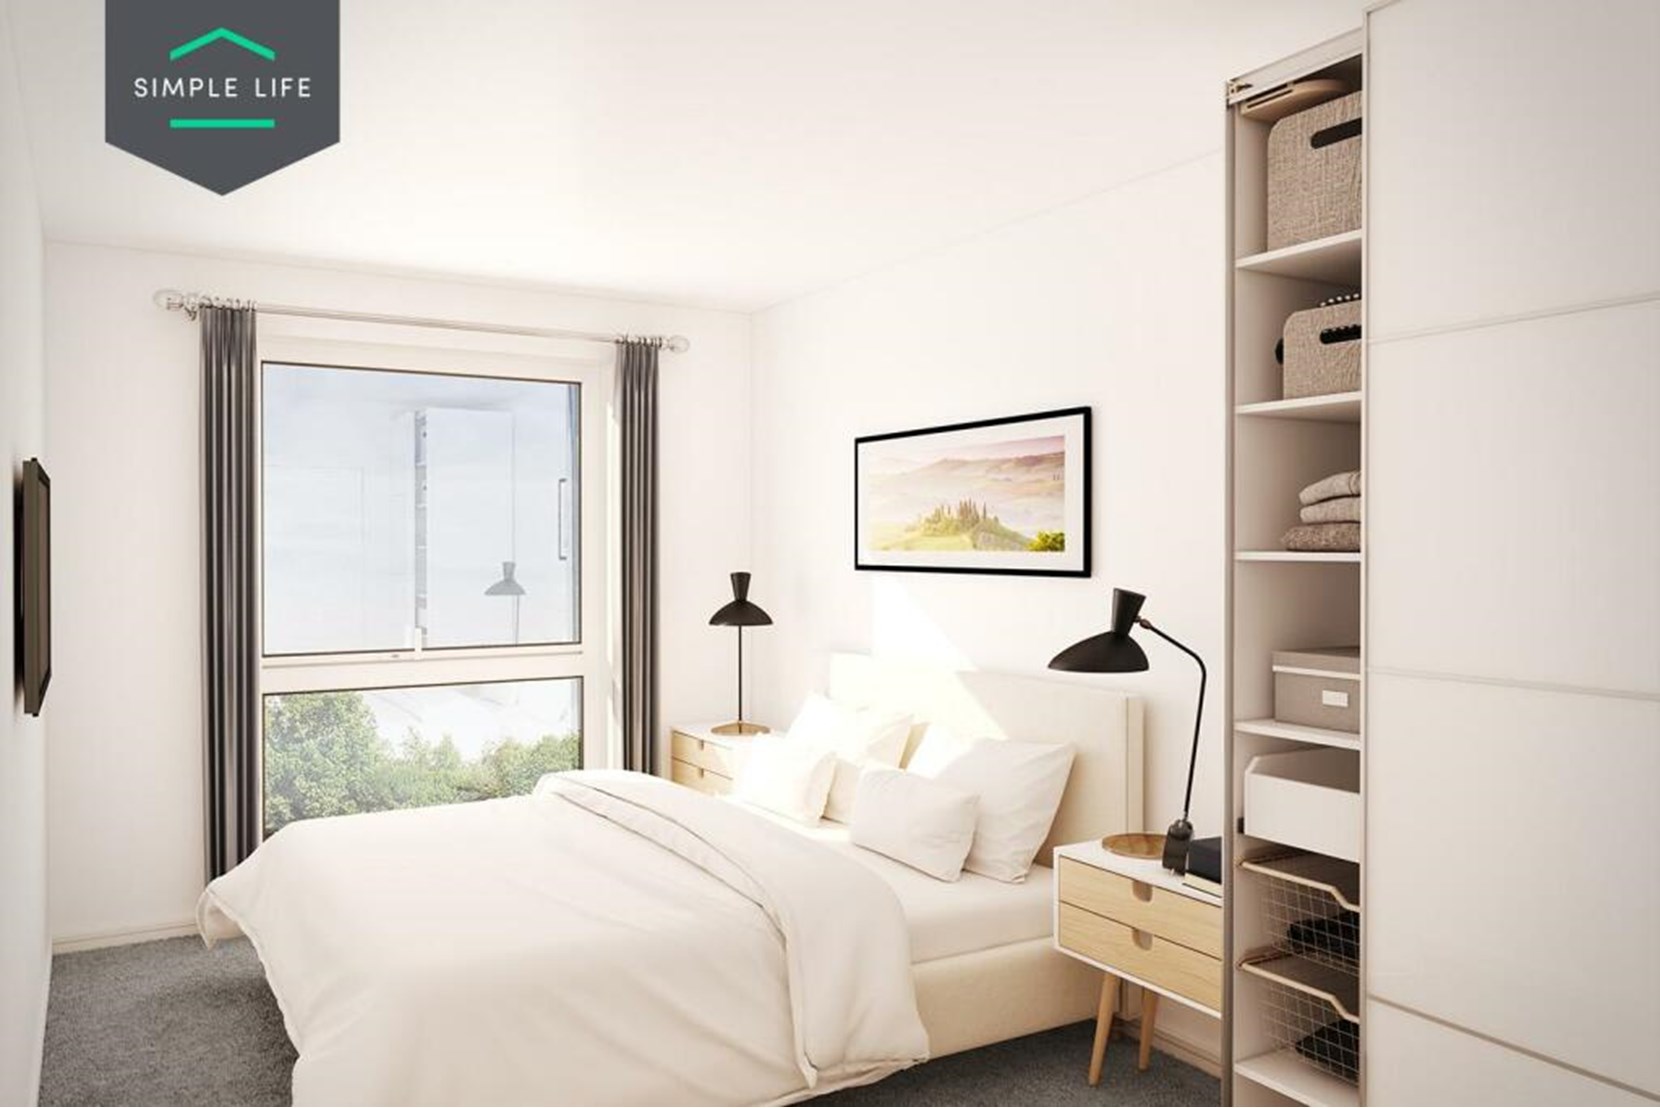 Apartments by Simple Life to Rent, The Newton, 3 bedroom apartment, bedroom